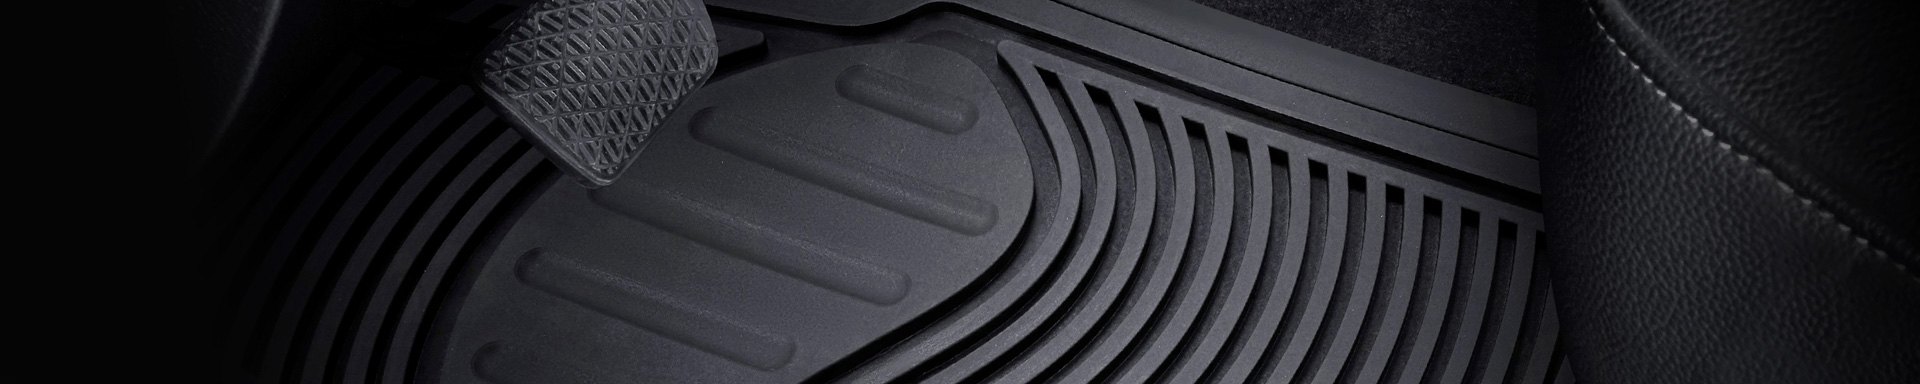 New Series Of Rixxu Trimmable All-Weather Floor Mats